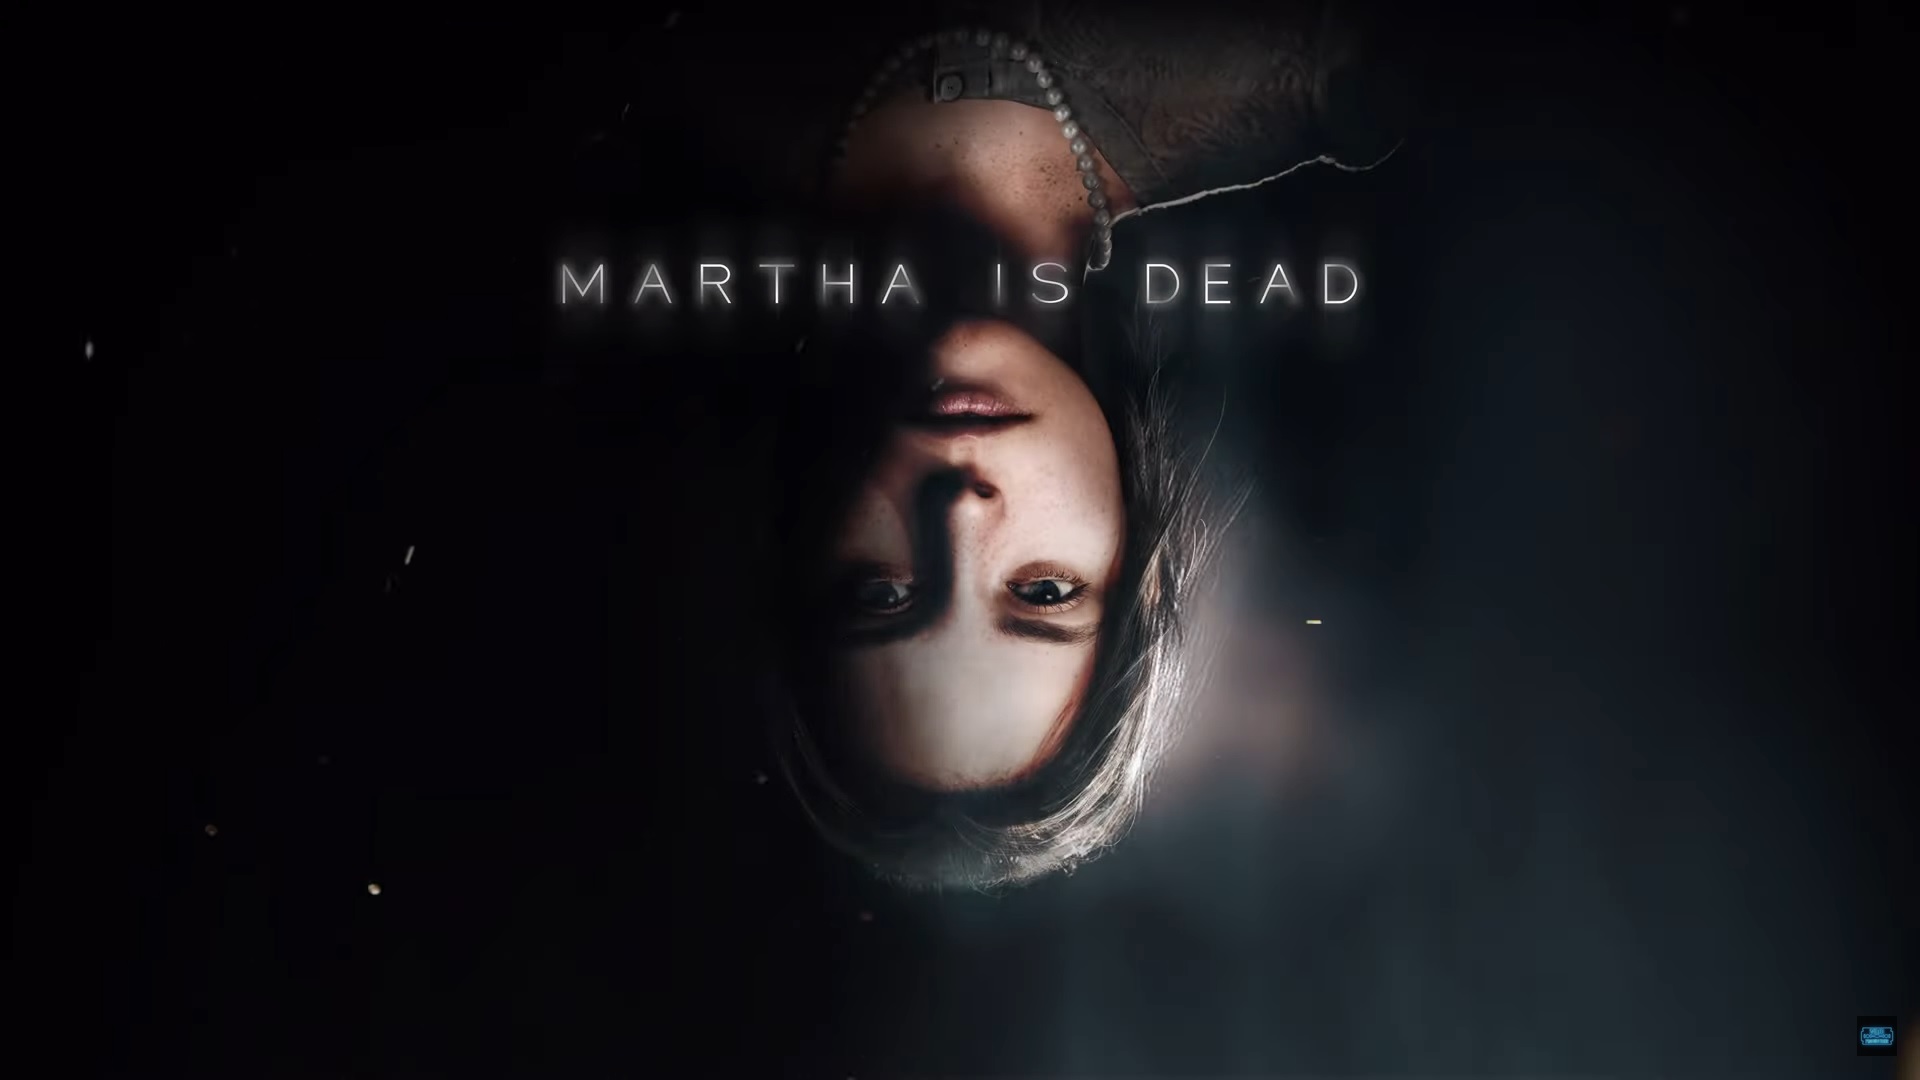 martha is dead rating download